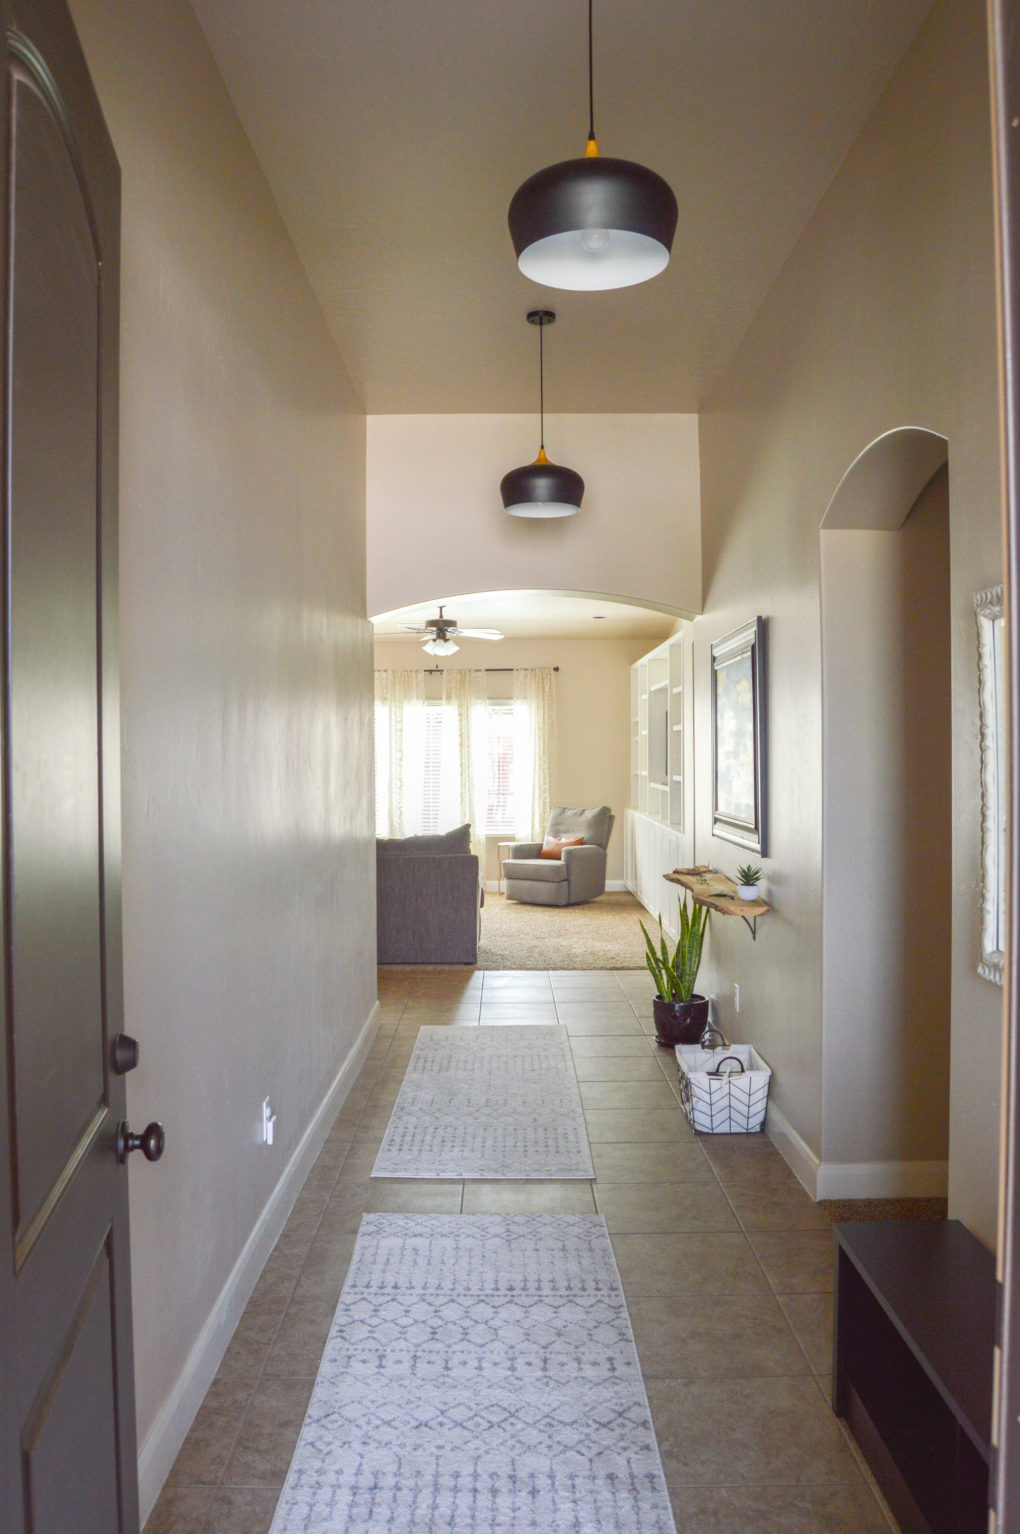 Modern, boho hallway and long entryway ideas. Our entry hallway makeover including pendant lighting, coat hangers, live edge shelf. Before hanging our travel gallery.